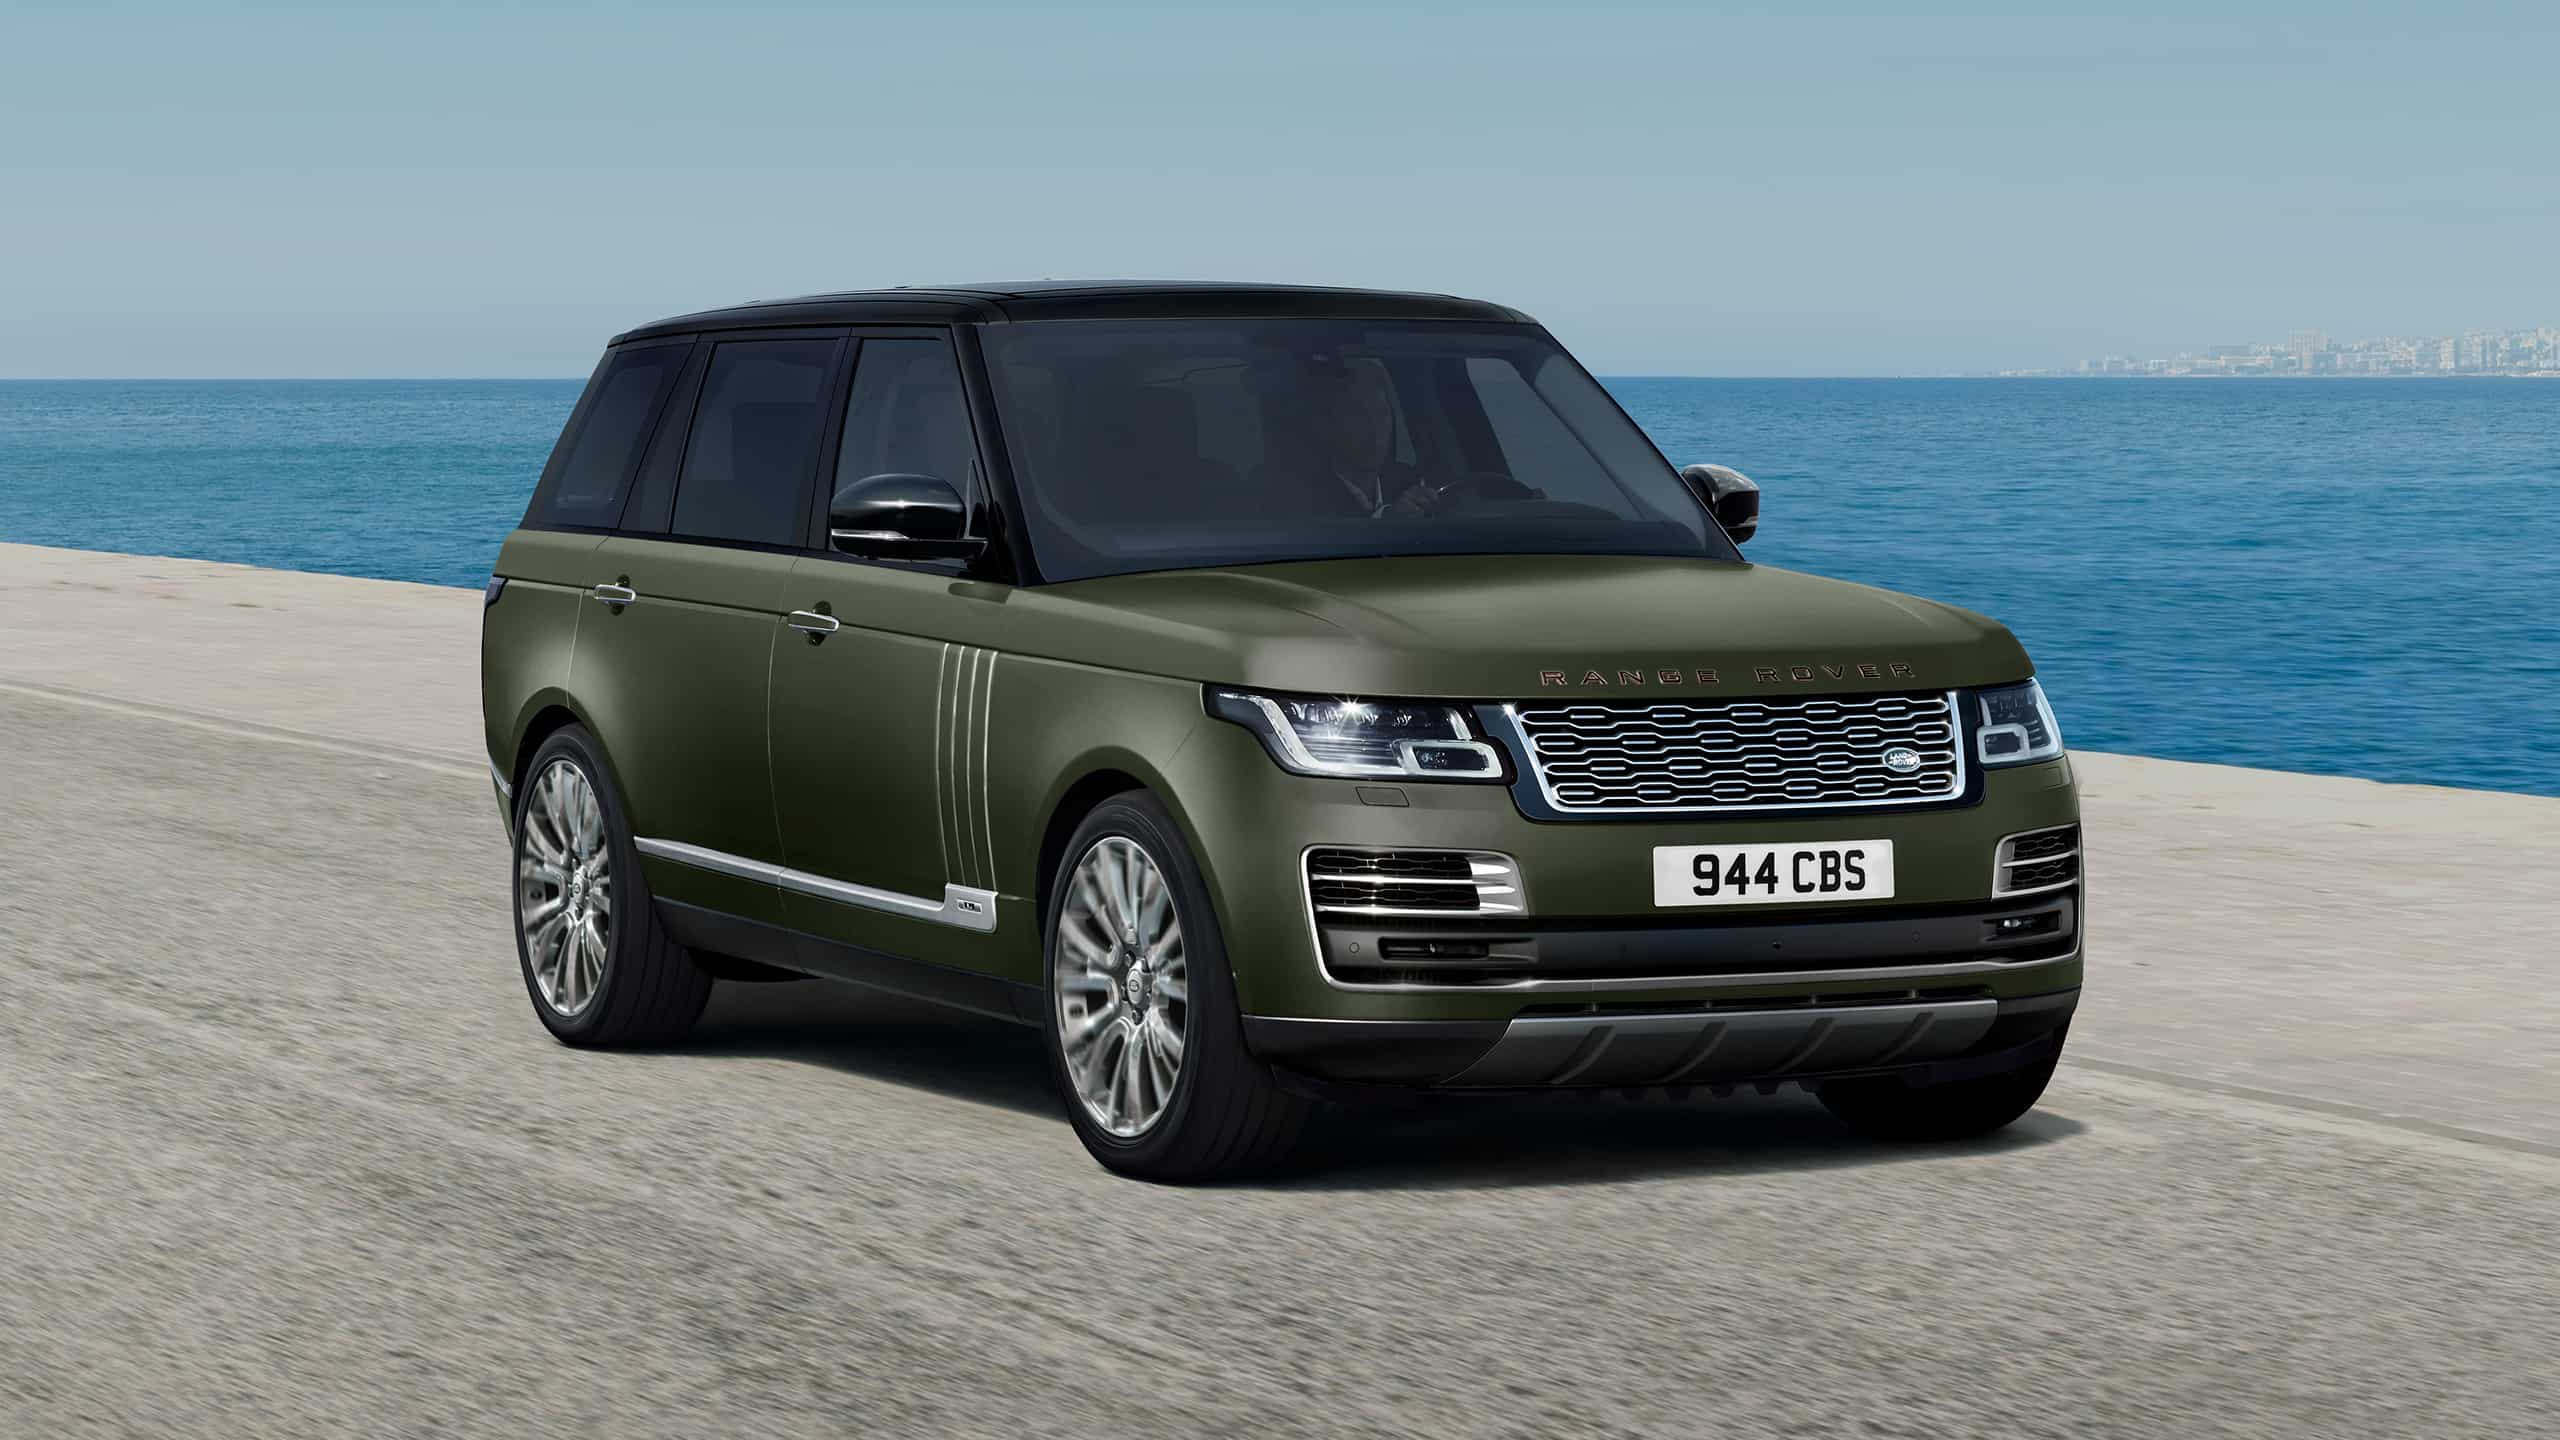 New Range Rover SVAutobiography Ultimate editions